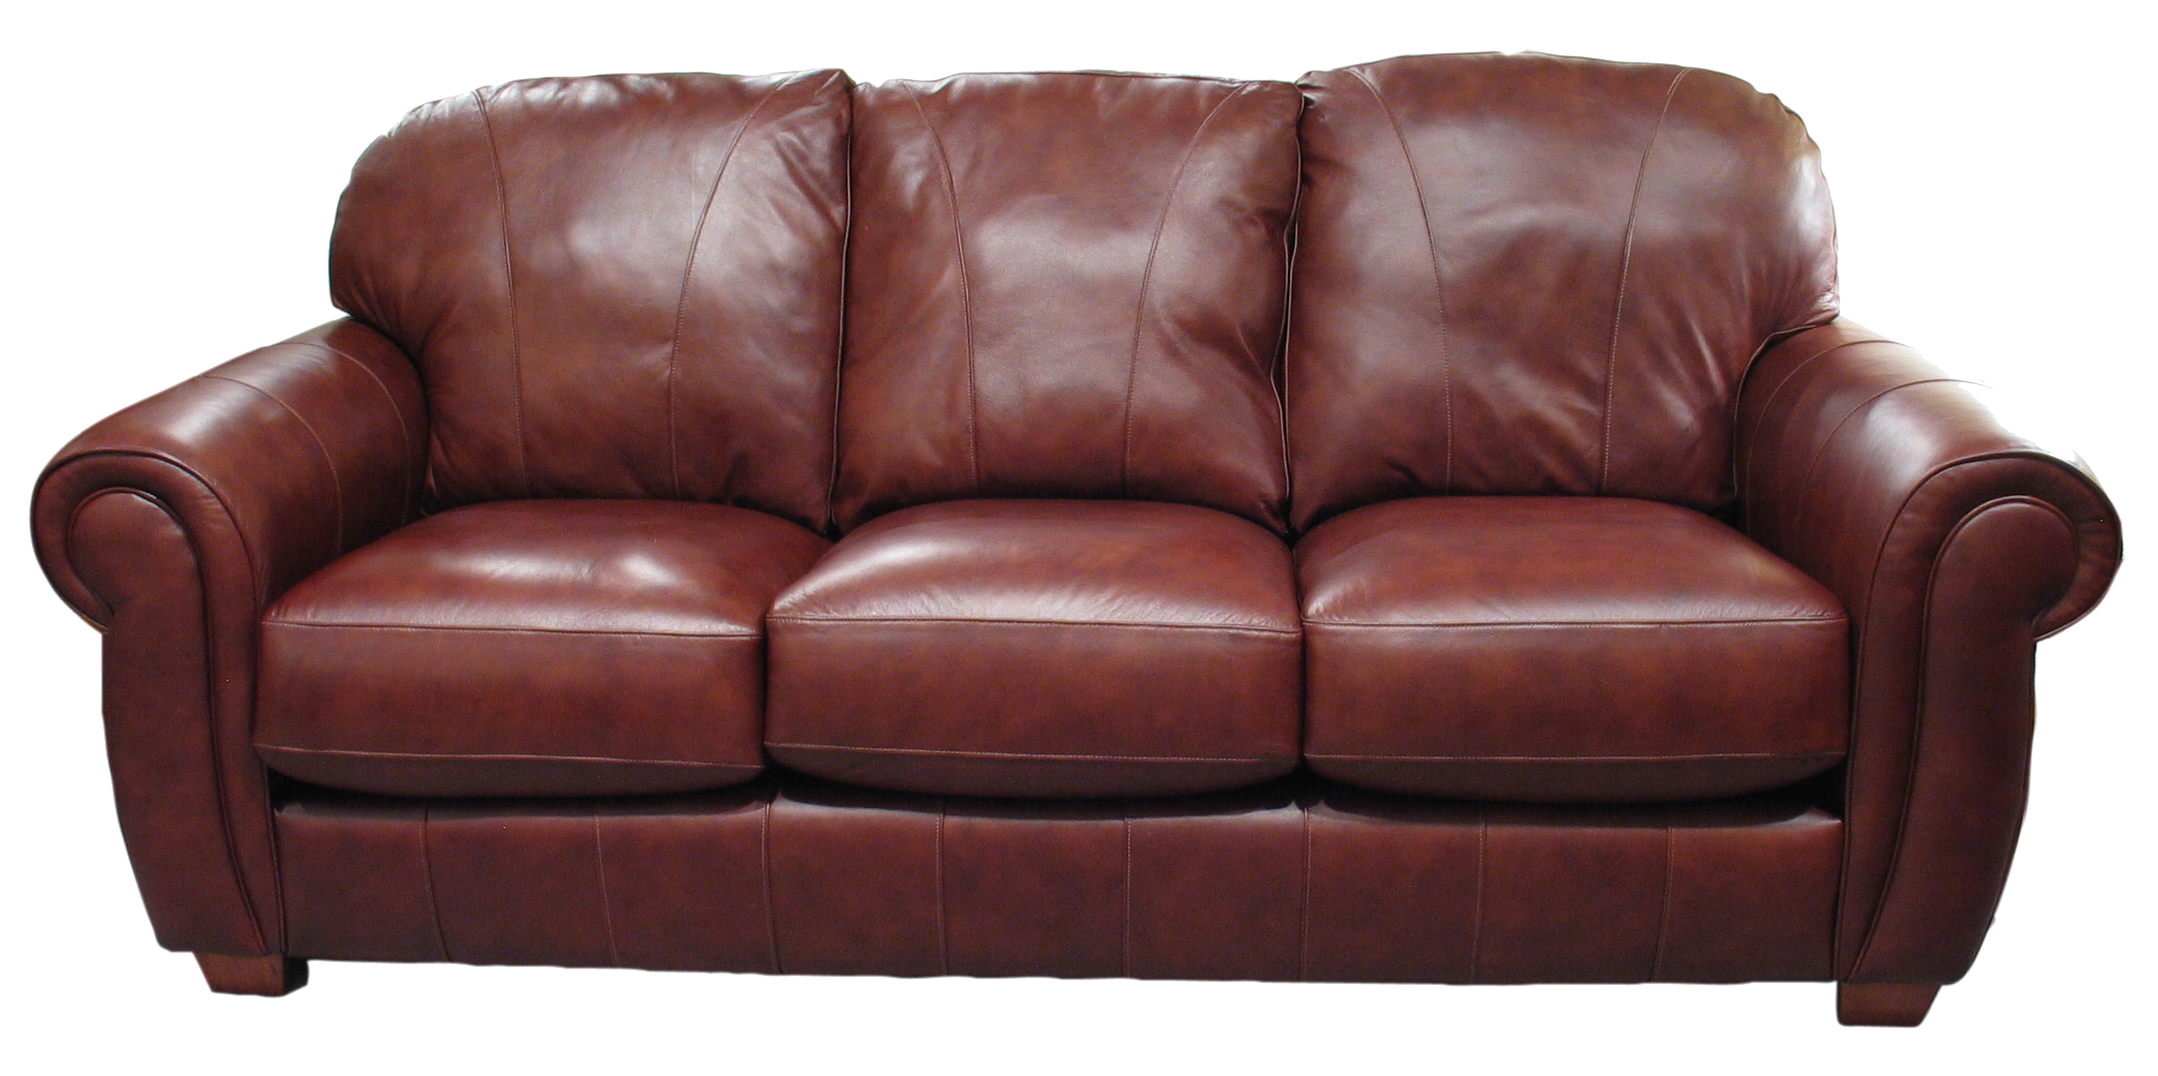 couch clipart transparent background